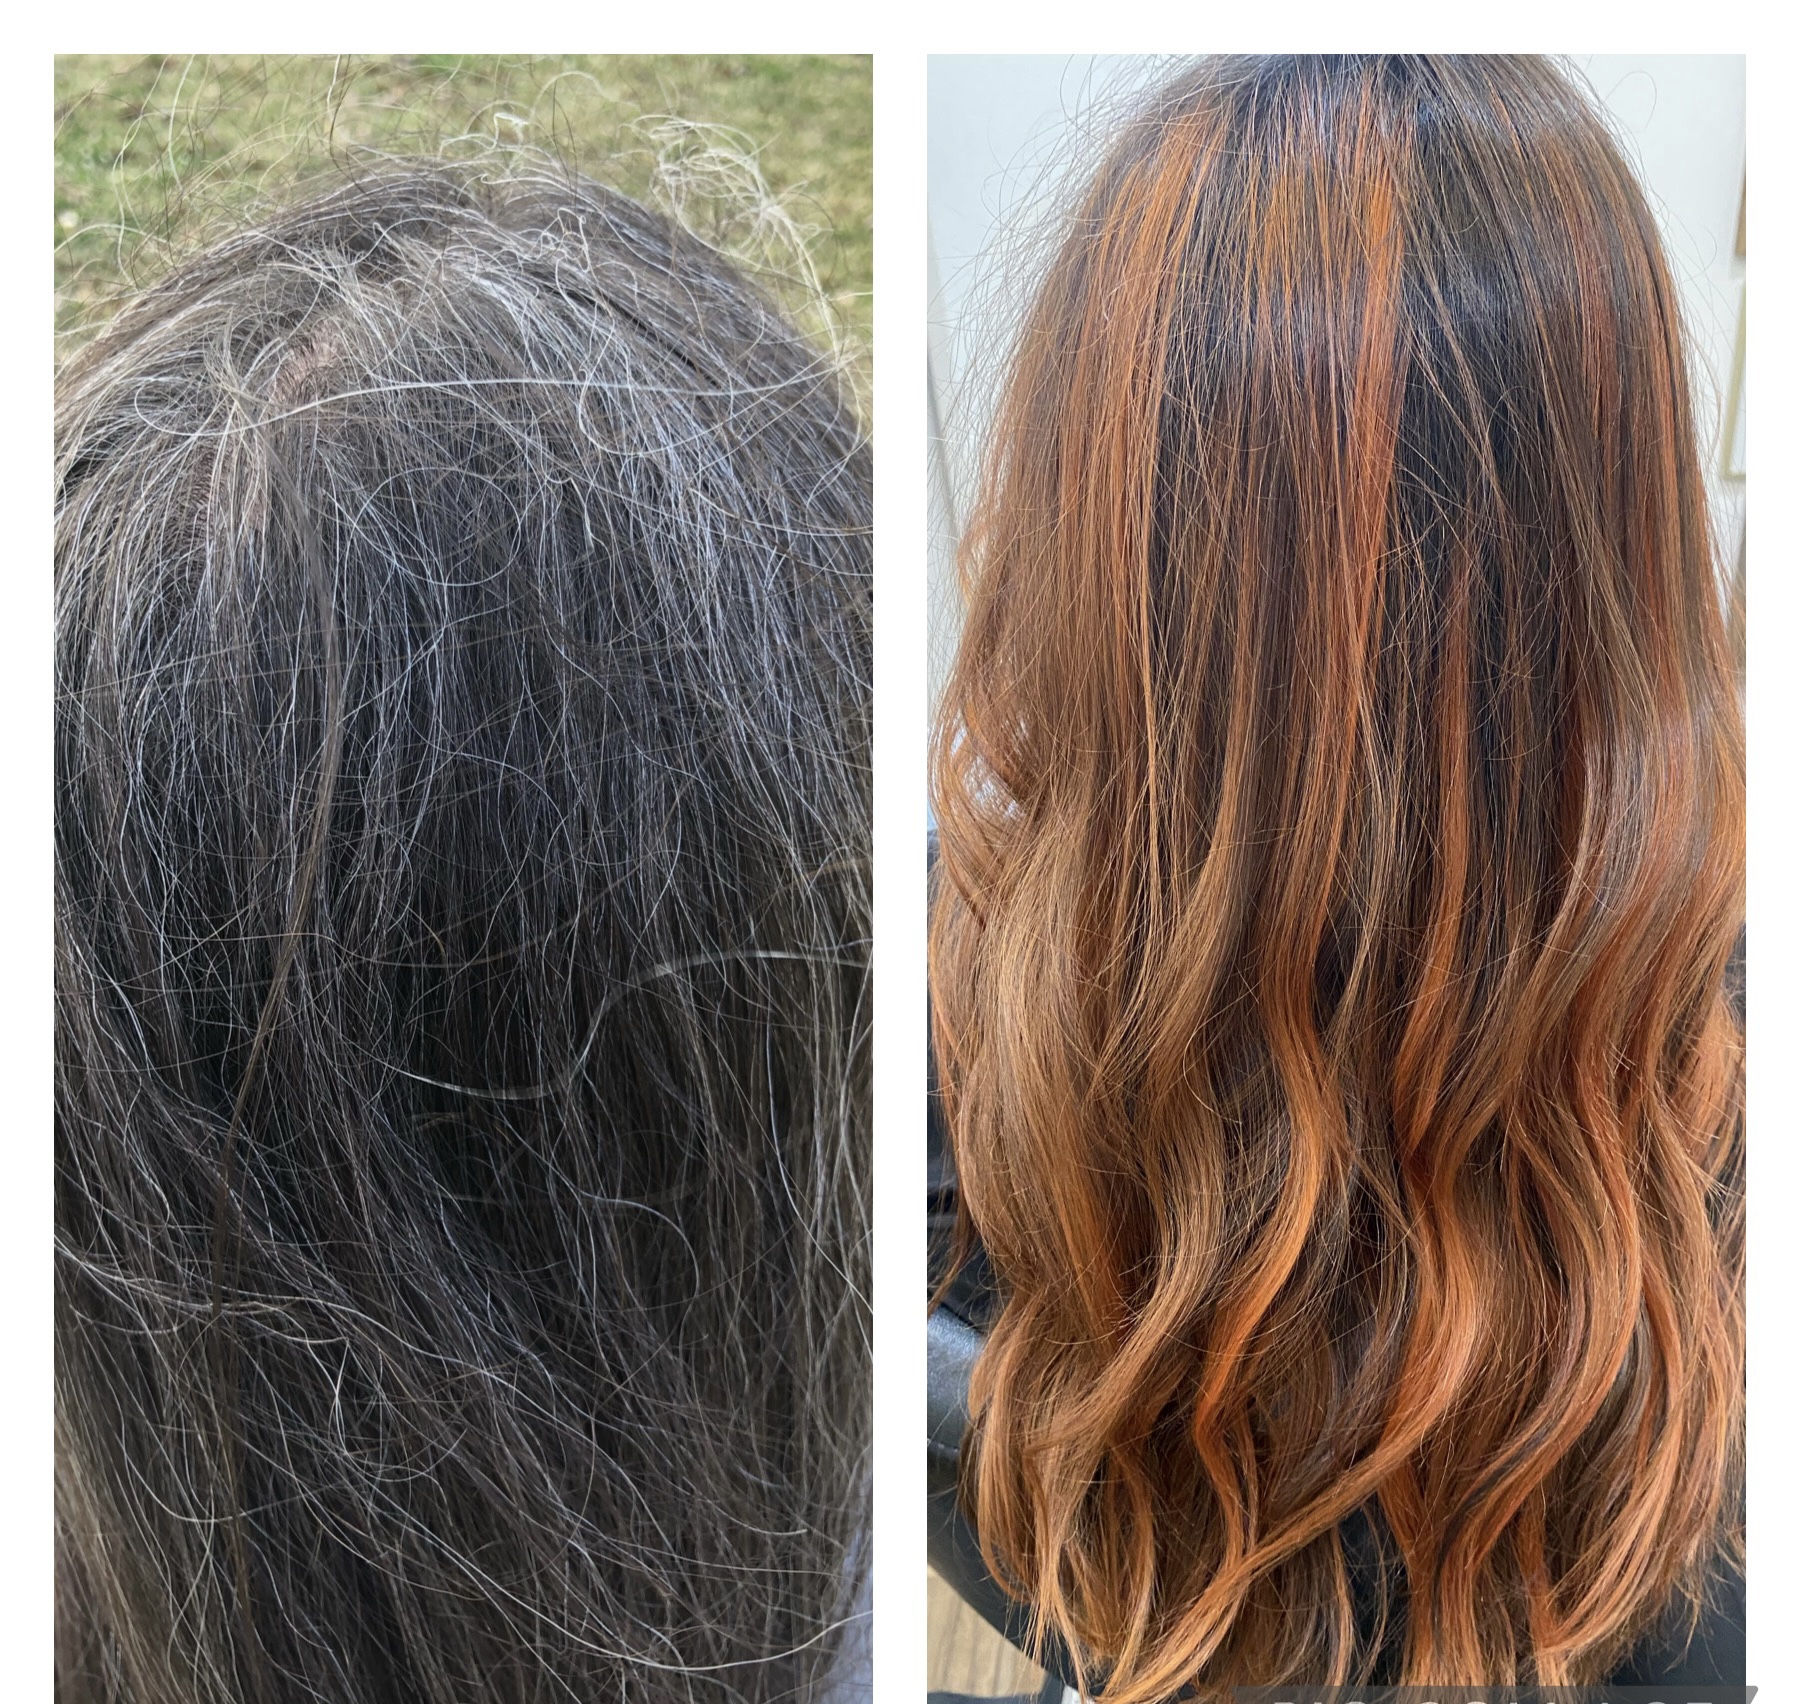 side by side comparison of women's hair- one not colored and one colored